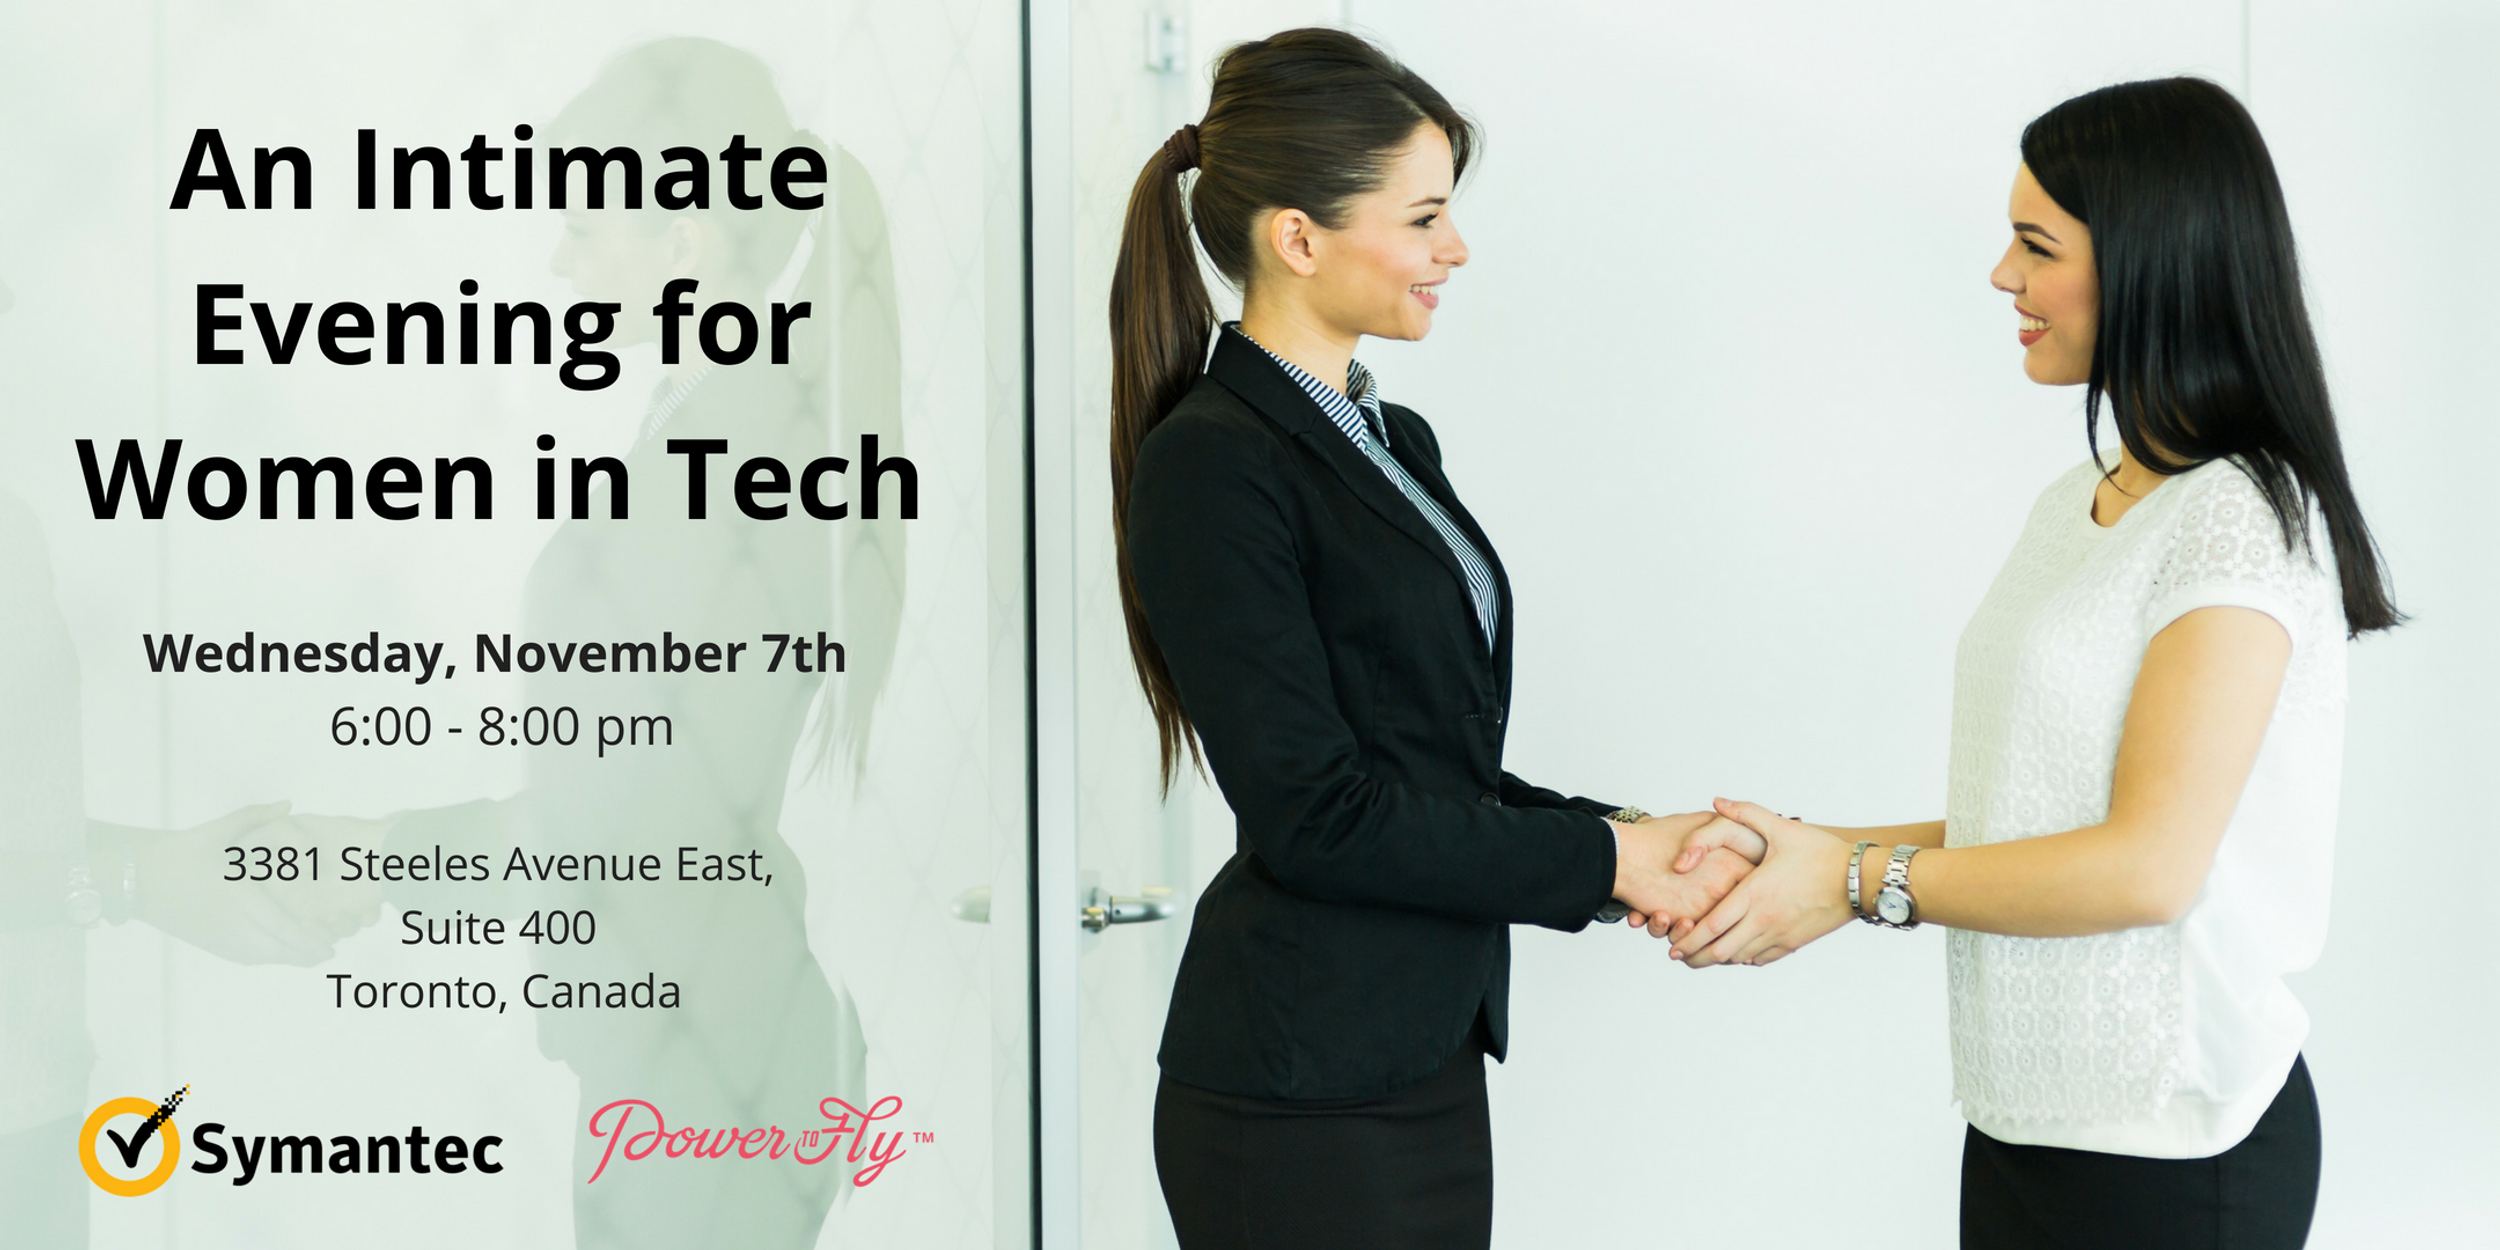 Symantec + PowerToFly Invite You to An Intimate Evening for Women in Tech